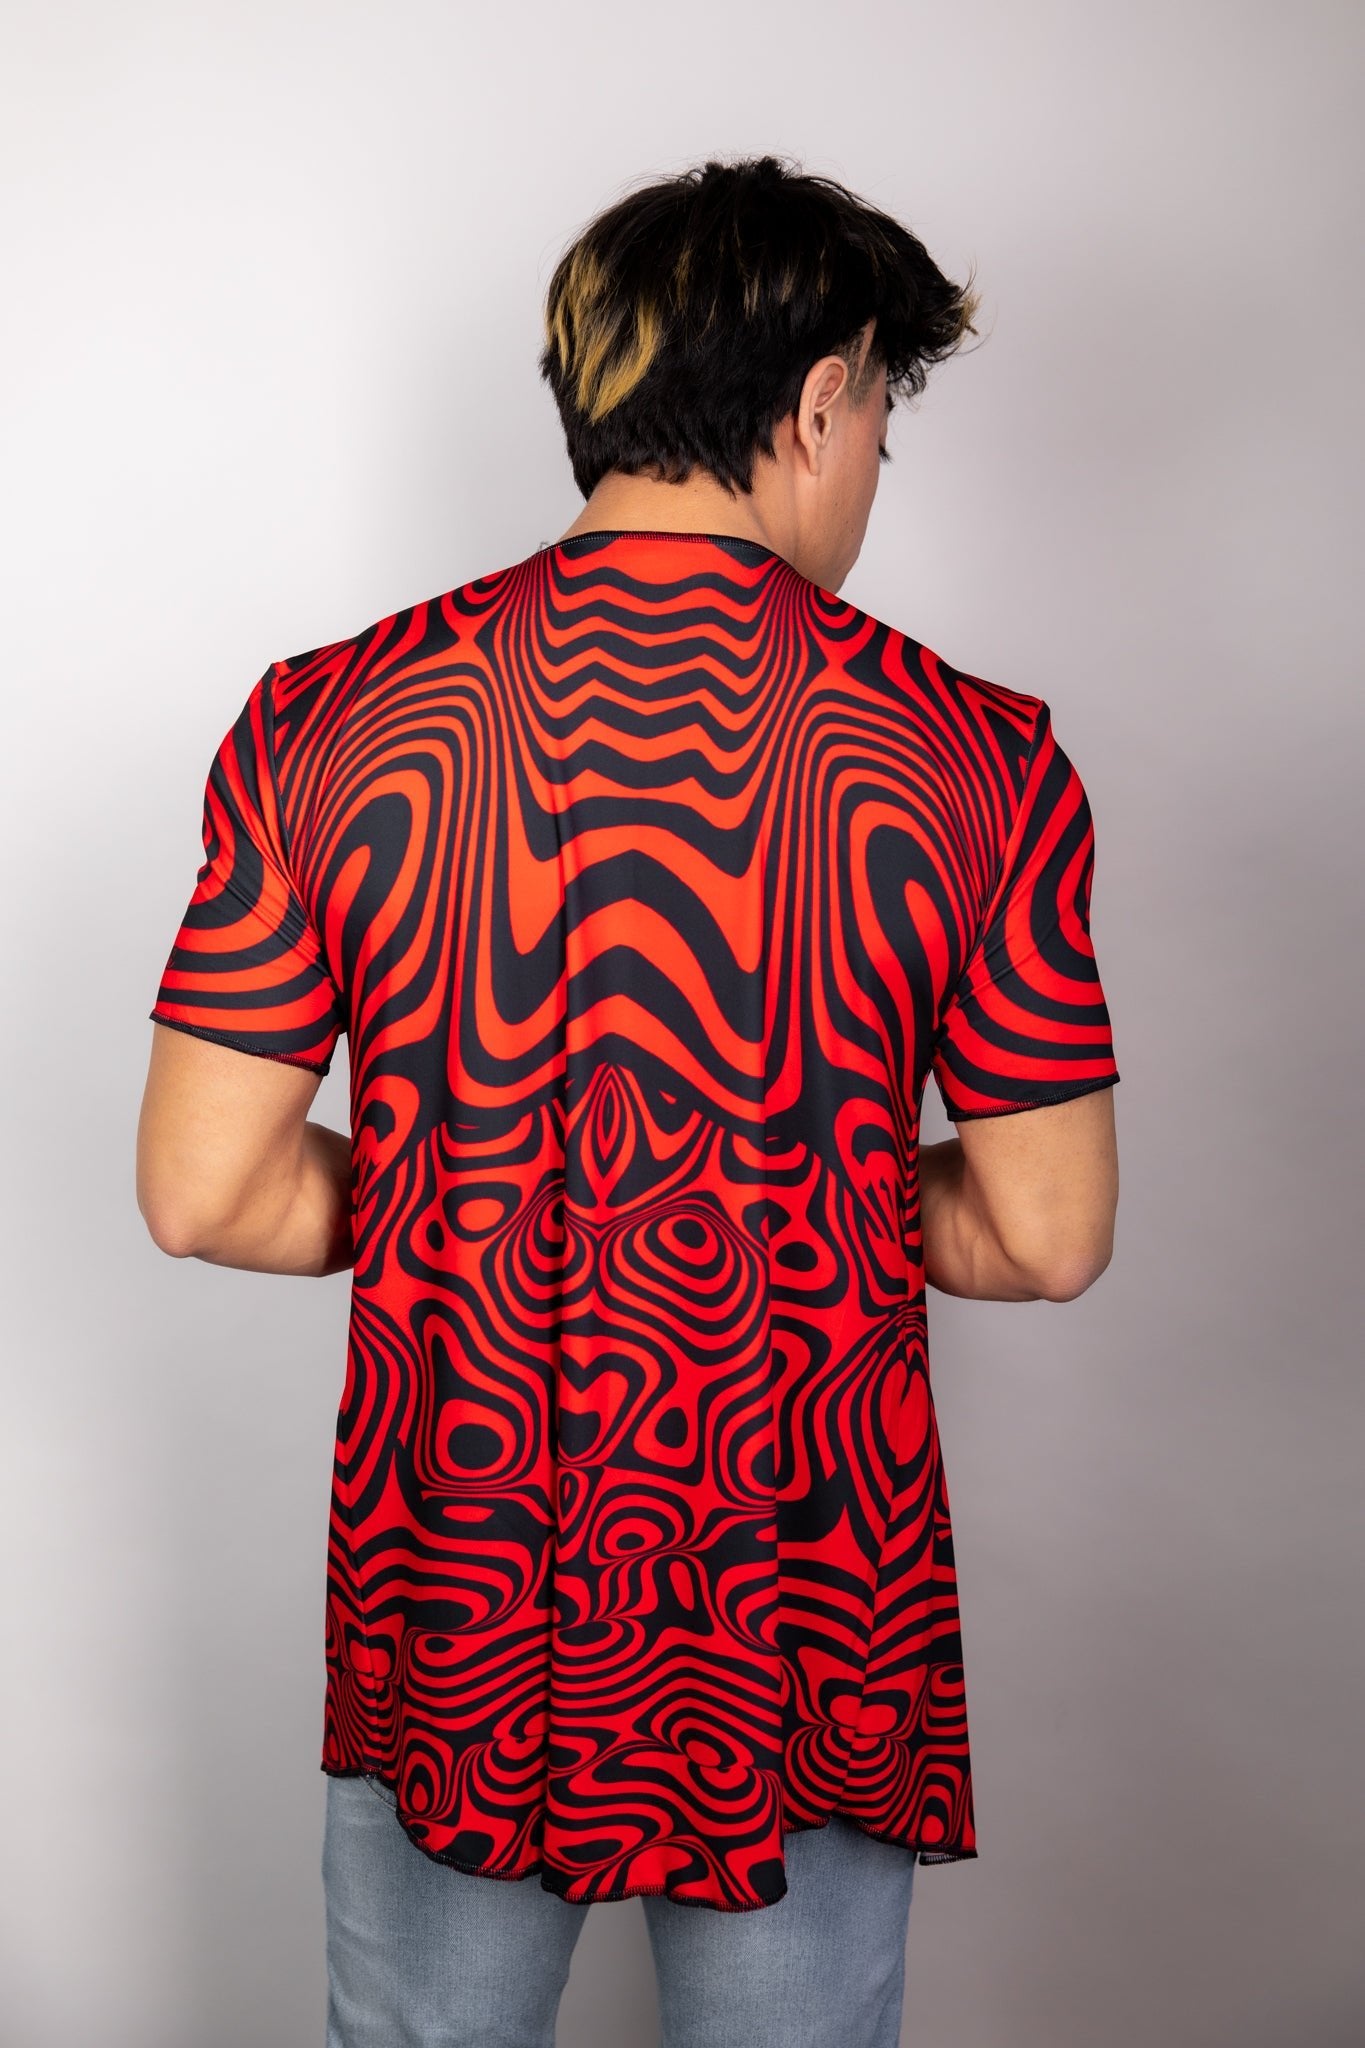 Red Void Open Festival Tee - Freedom Rave Wear - Mens